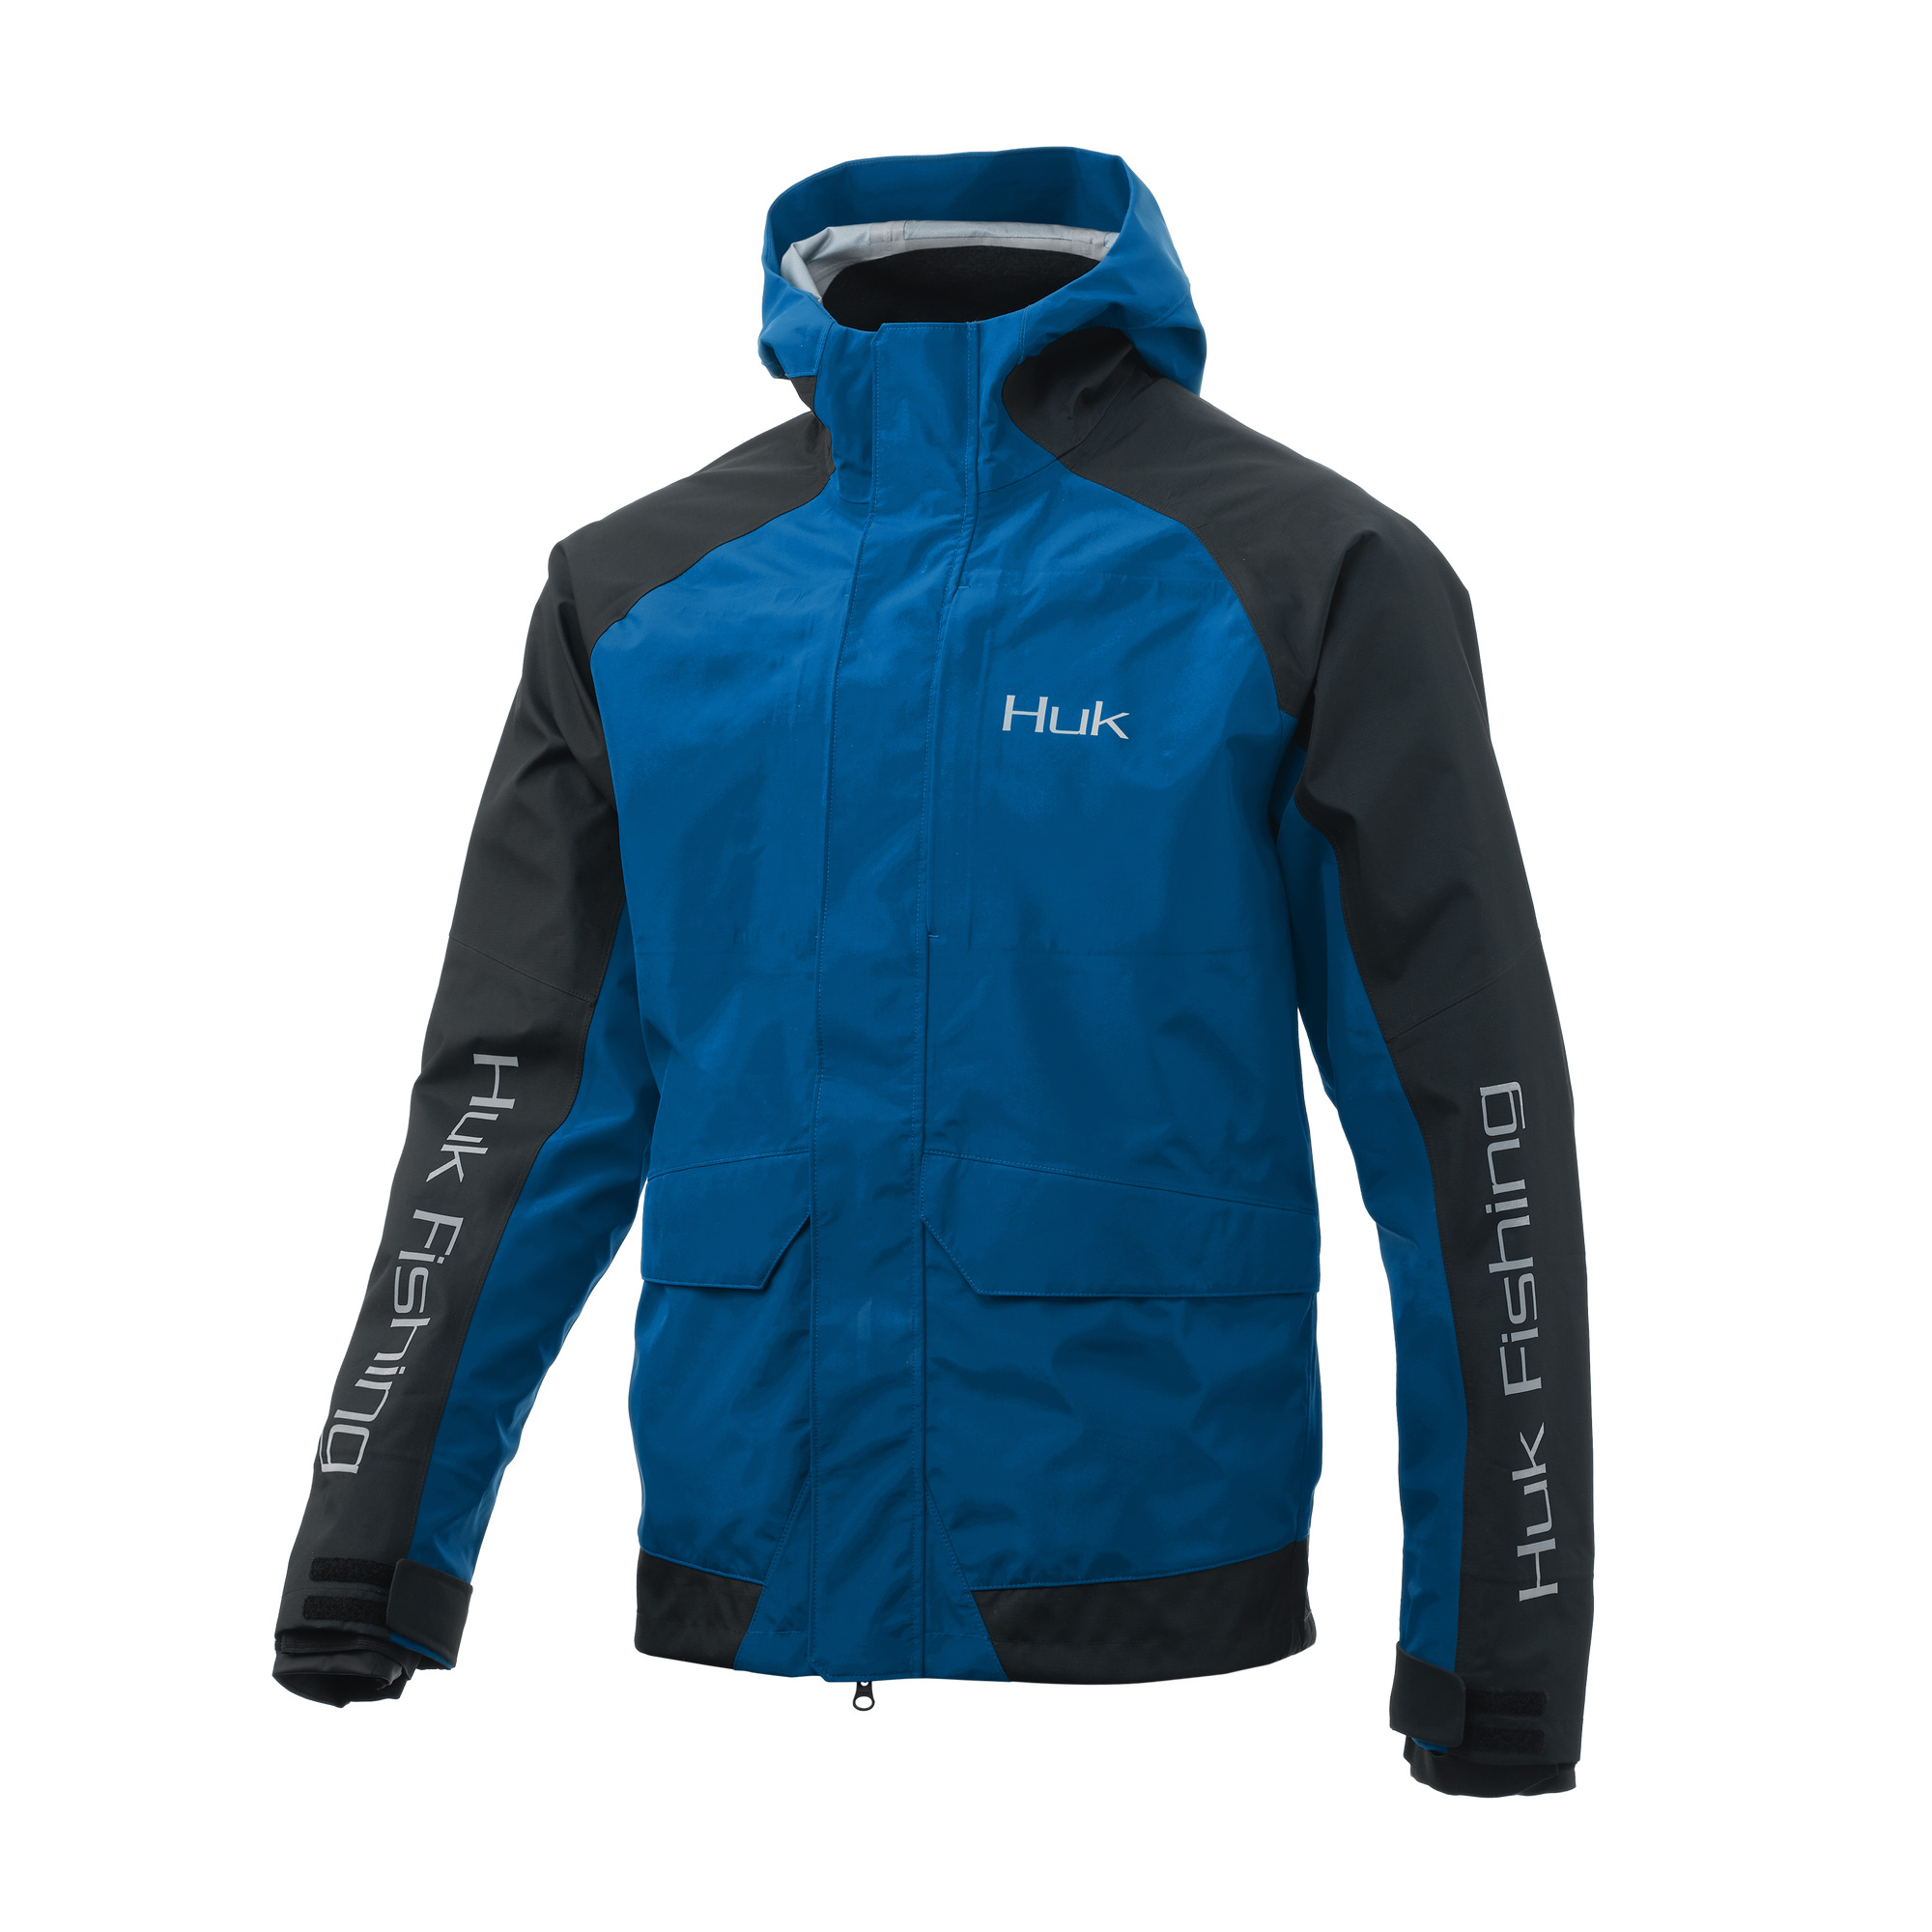 Transformer Packable Fishing Jacket – AFTCO